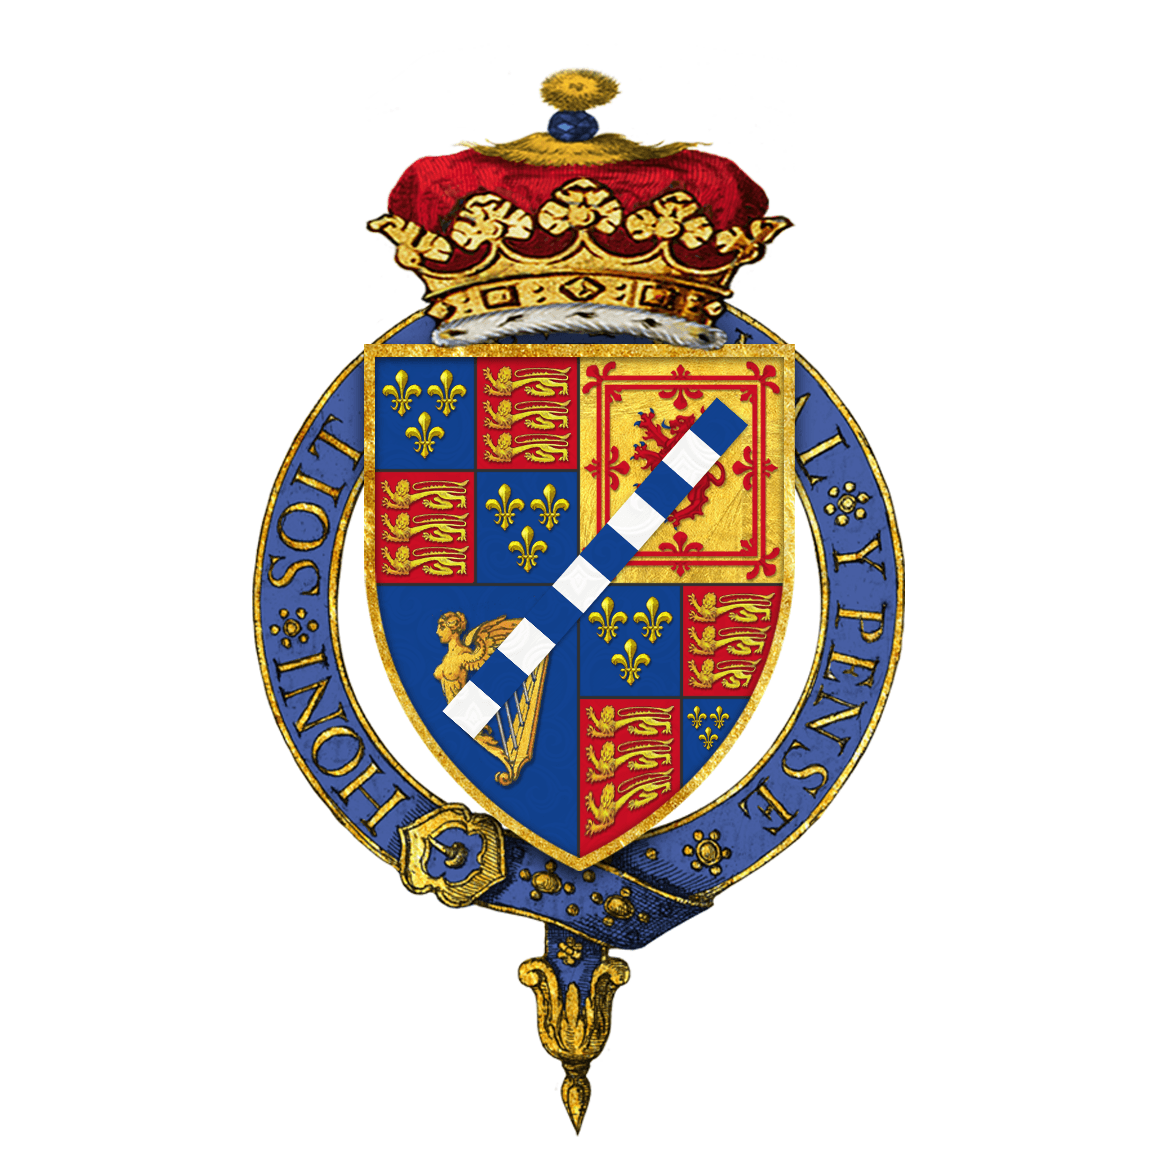 Henry Arms Logo - File:Coat of arms of Henry FitzRoy, 1st Duke of Grafton, KG.png ...